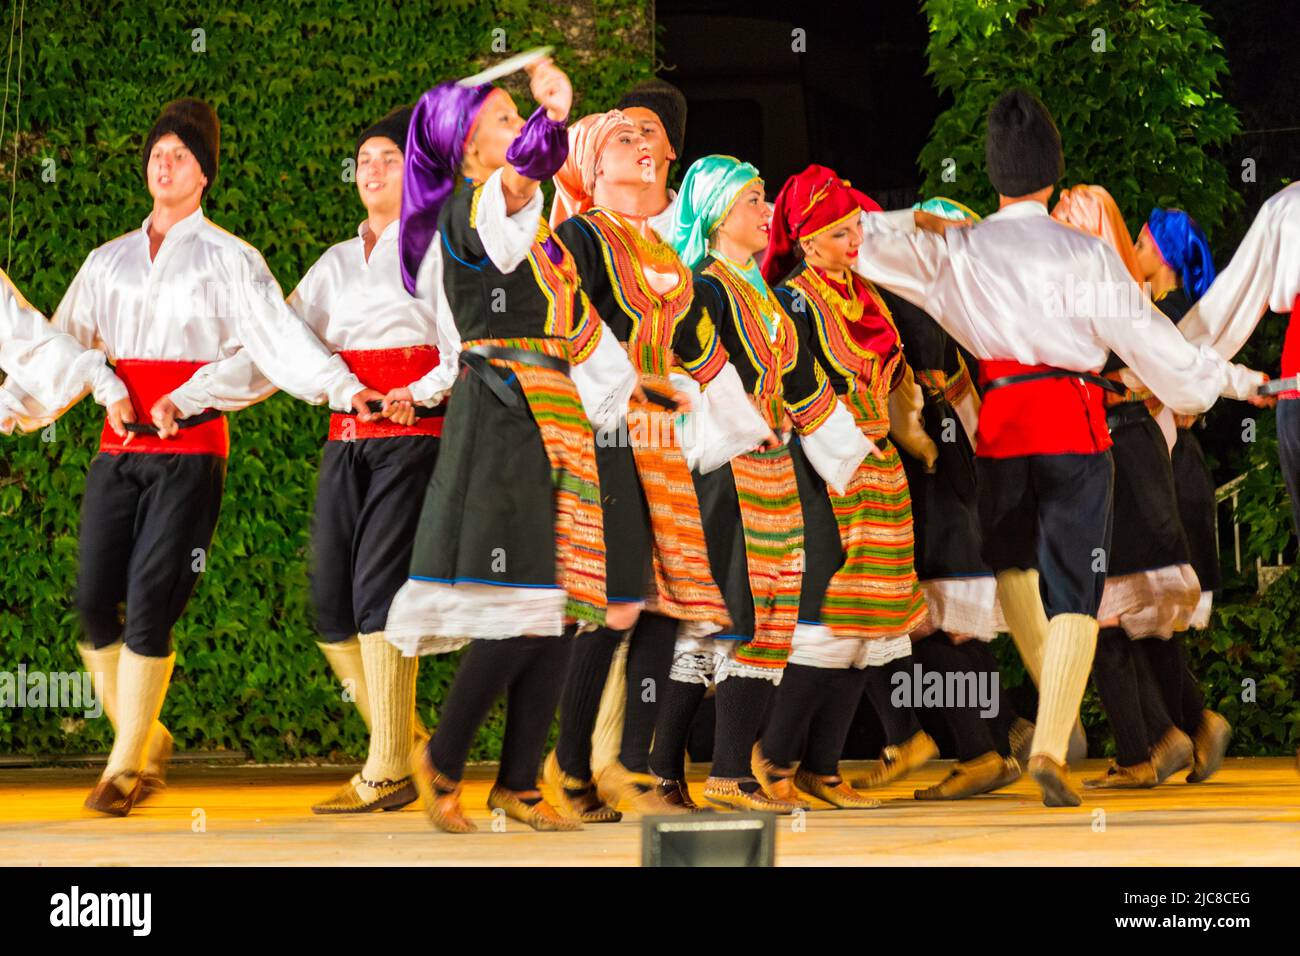 Serbian dancers dressed in traditional costumes at 24th International Folklore Festival,Varna Bulgaria 2015 Stock Photo